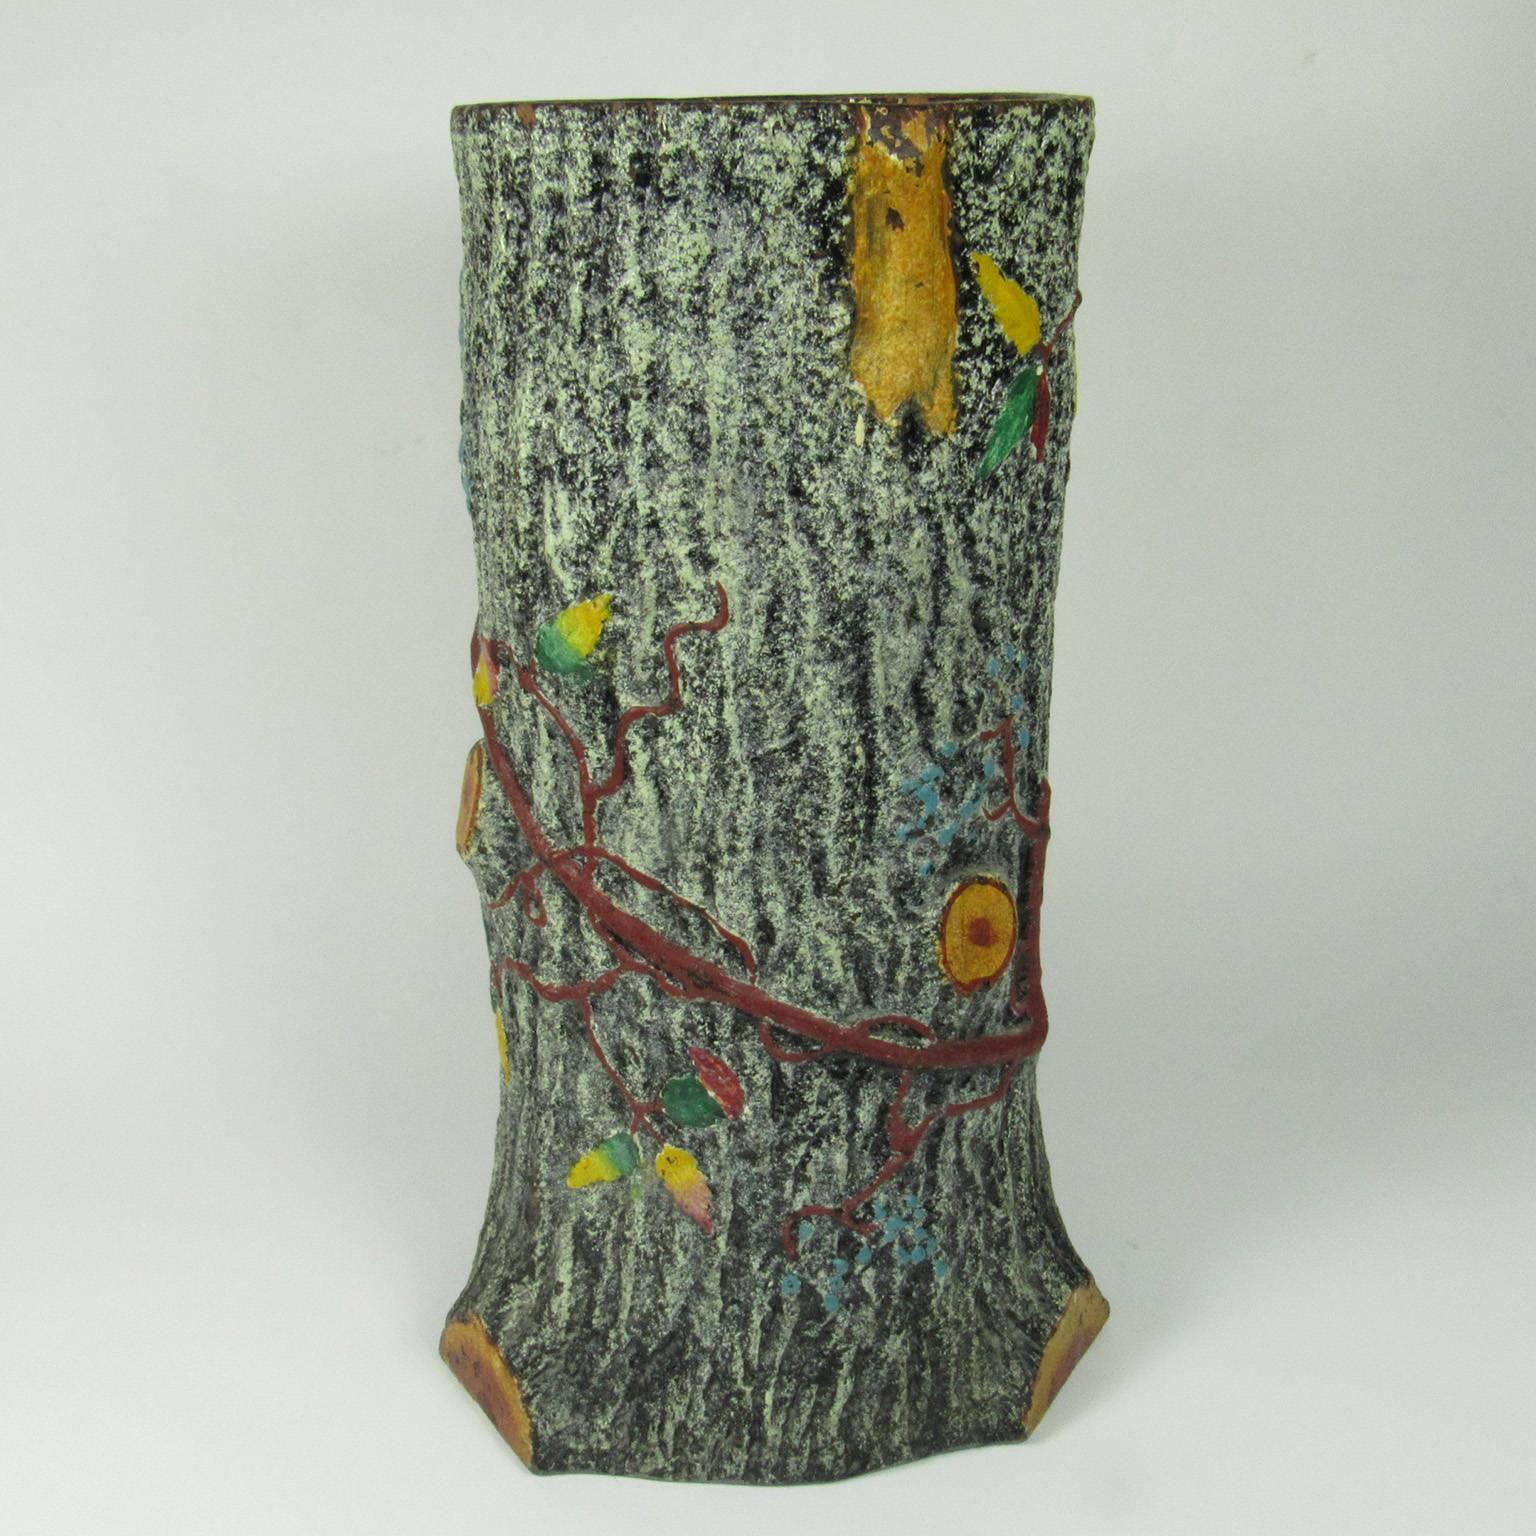 Vintage faux bois ceramic umbrella stand in the form of a tree trunk encrusted with a vine and fall leaves. Measures: Height: 19 in., diameter: 11 in.
Provenance: Joel and Sharon Schwartz collection.